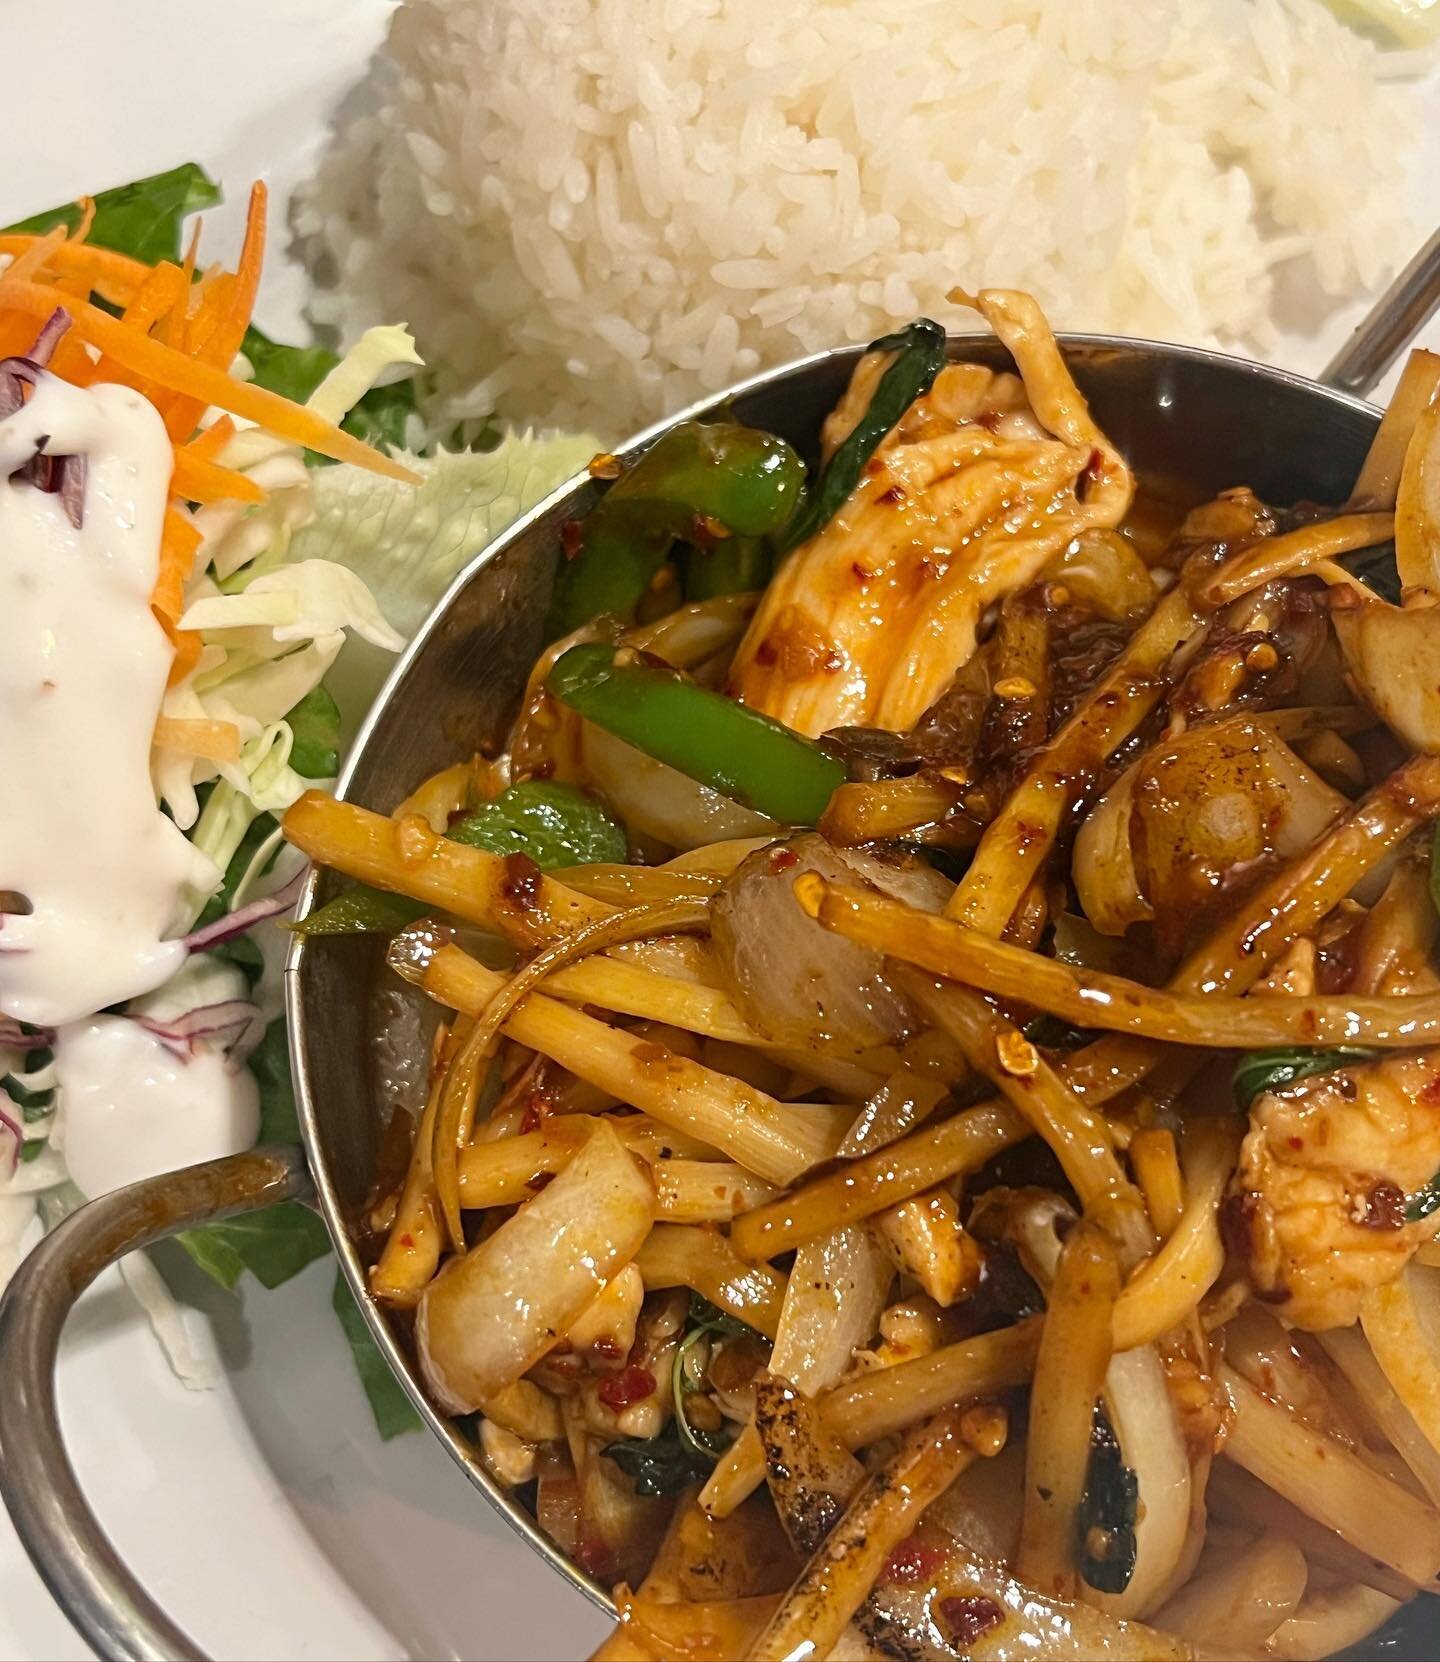 ✨Lunch Special✨ Spicy Basil Leaves 🌶️

Vegan, vegetarian and gluten-free friendly 🌱 No MSG 

Now open for dine-in, take-out, and delivery! ✨

📞 661-513-0330, 661-513-0350 
🖥️ Order online at thaichefsvalencia.com 

Thai Chefs Restaurant 
📍28014 